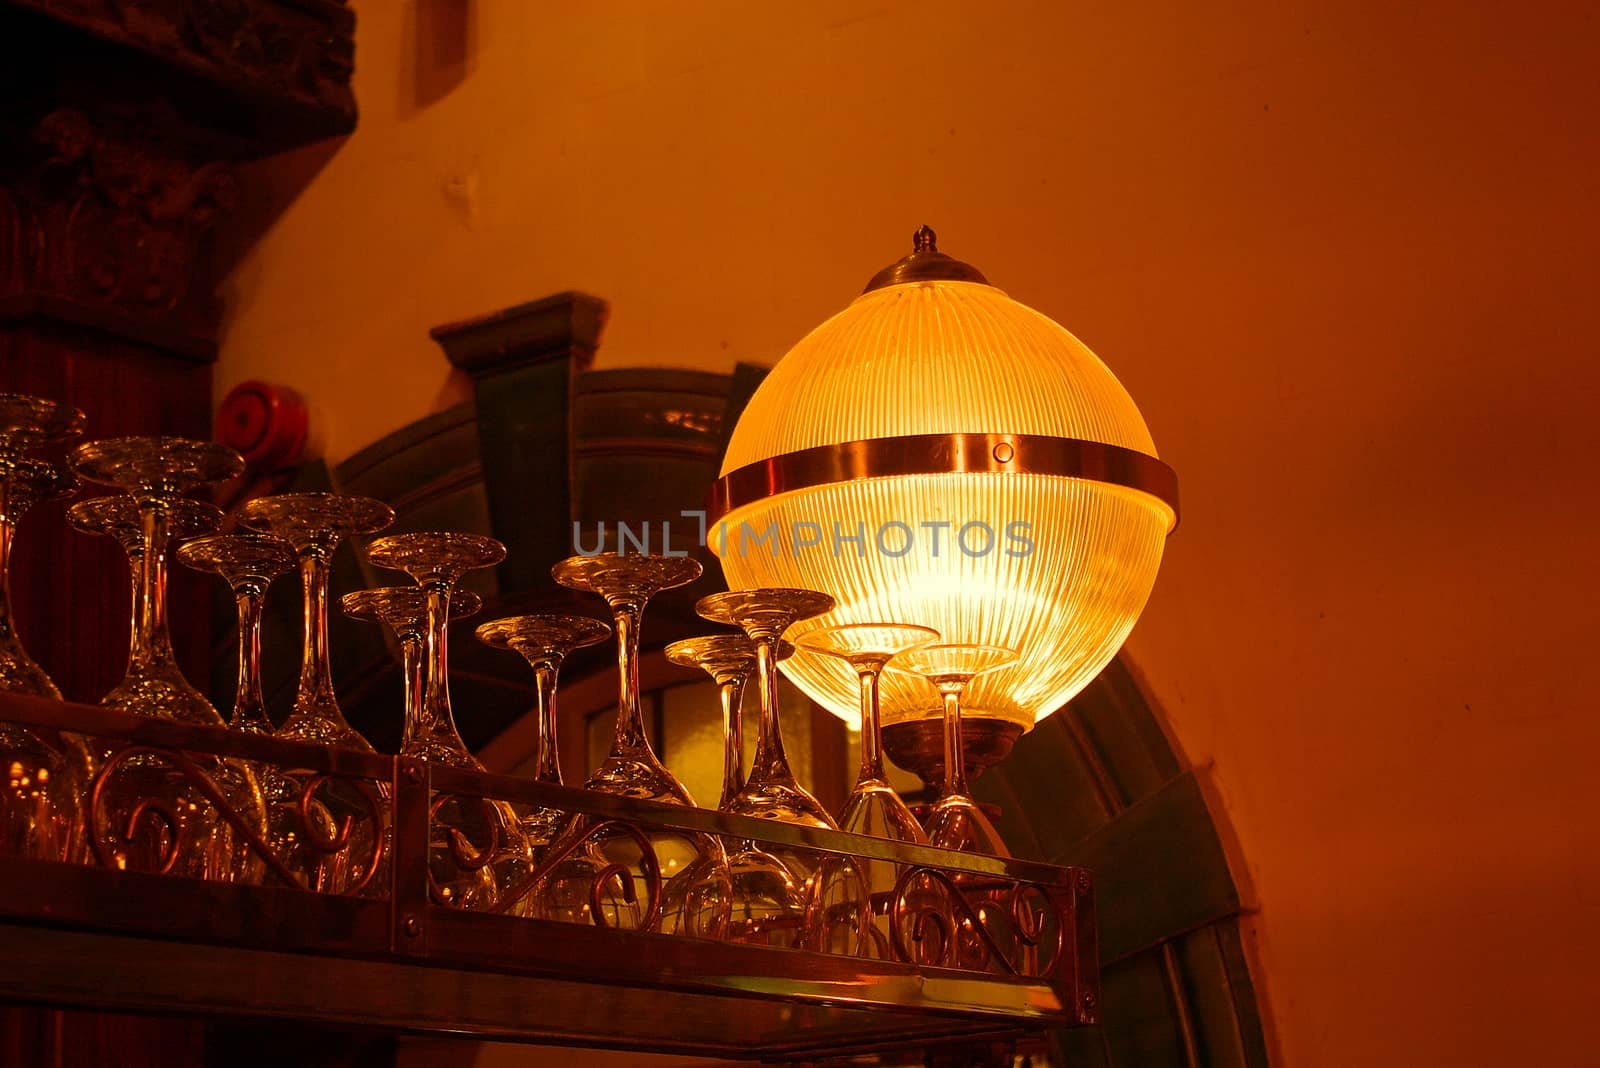 Lit bar interior featuring upturned glasses and a light